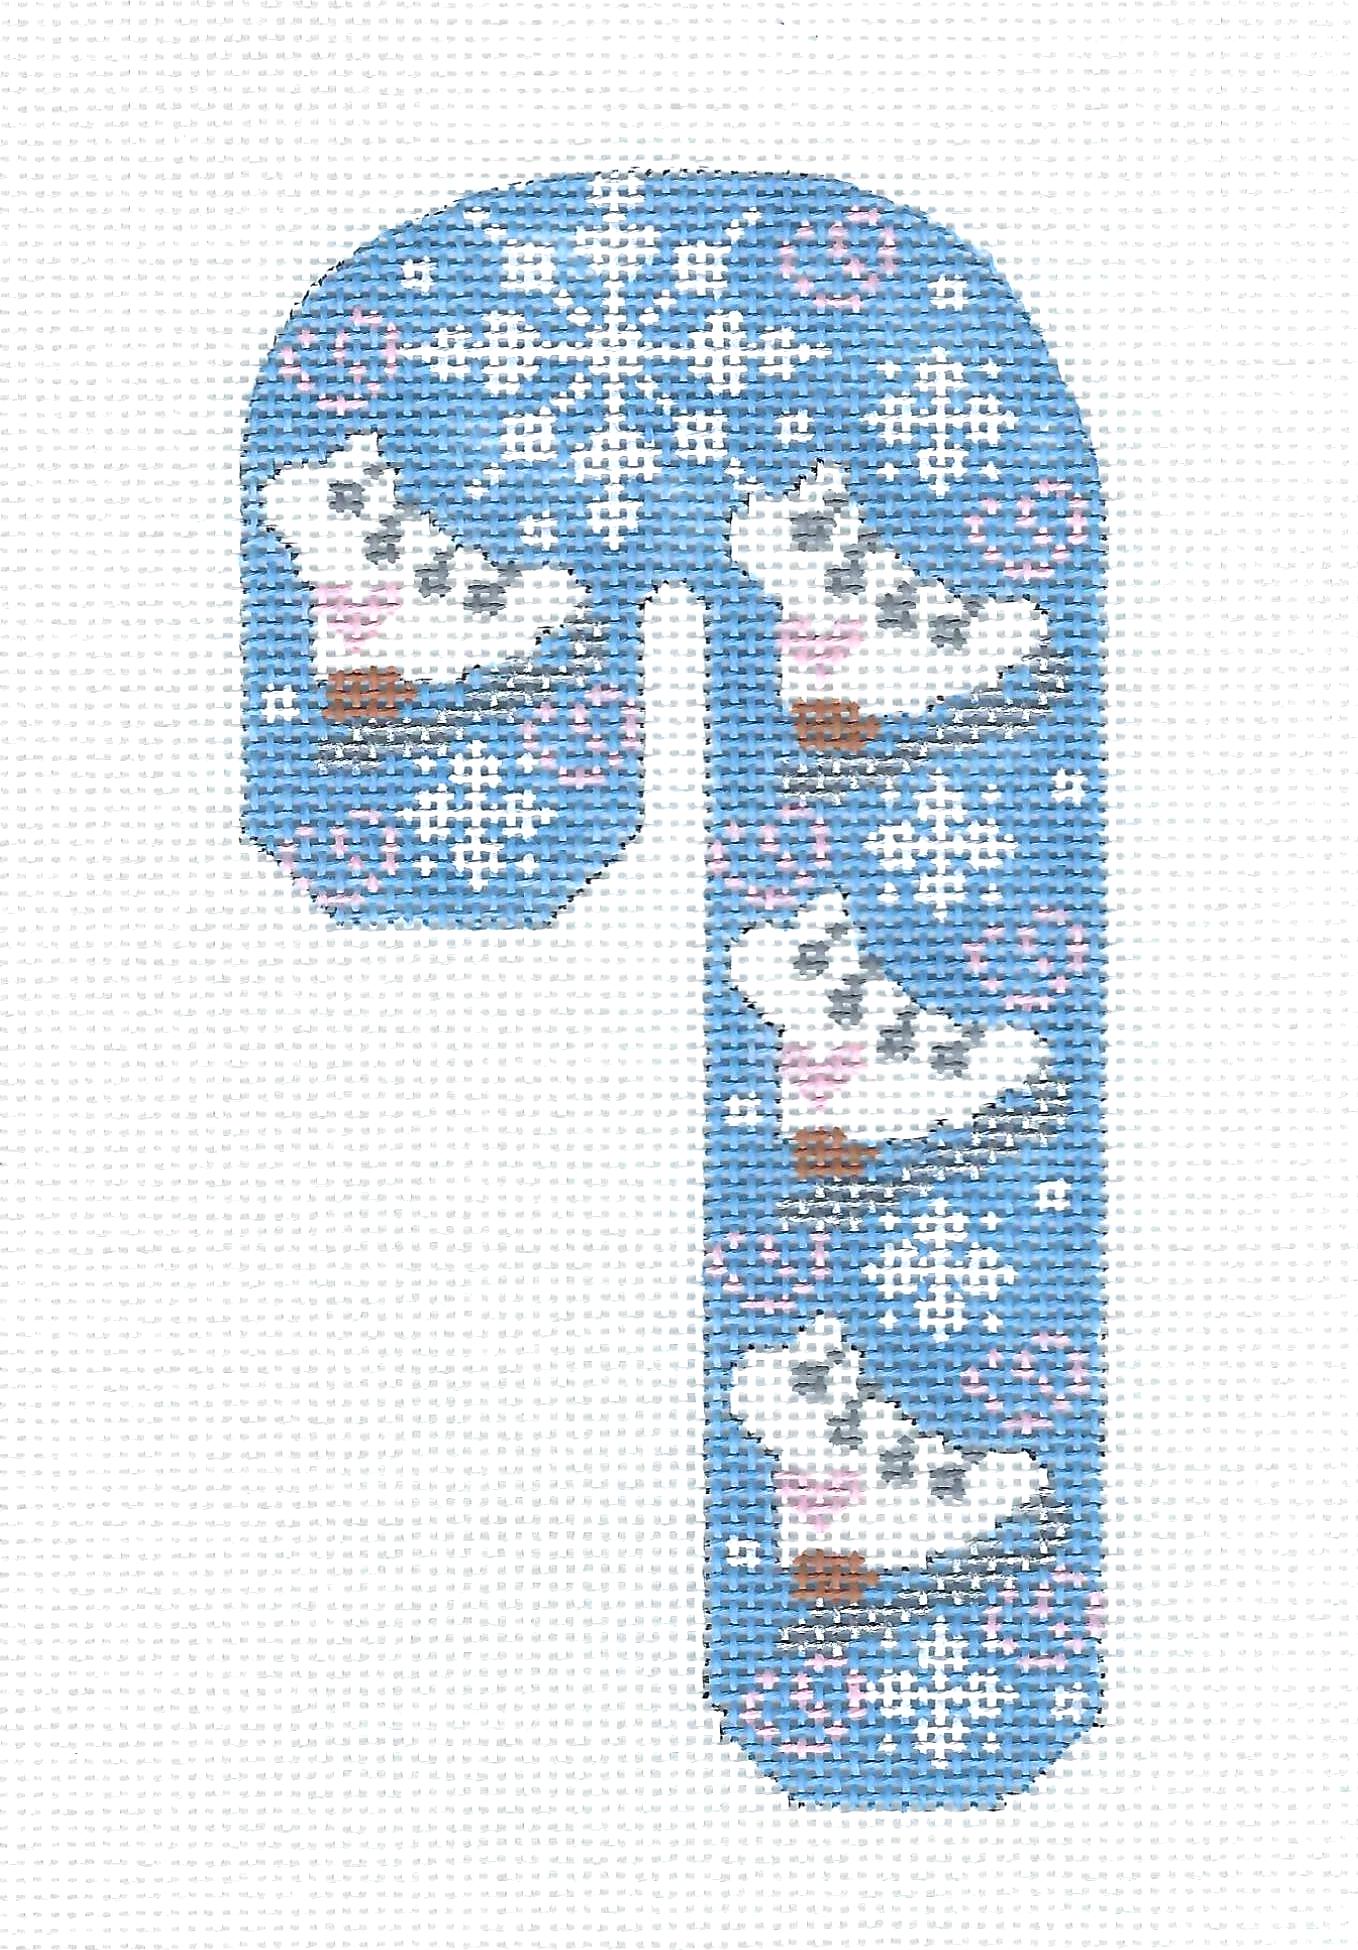 Candy Cane ~ ICE SKATING Medium Sports Candy Cane handpainted Needlepoint Canvas by CH Designs - Danji